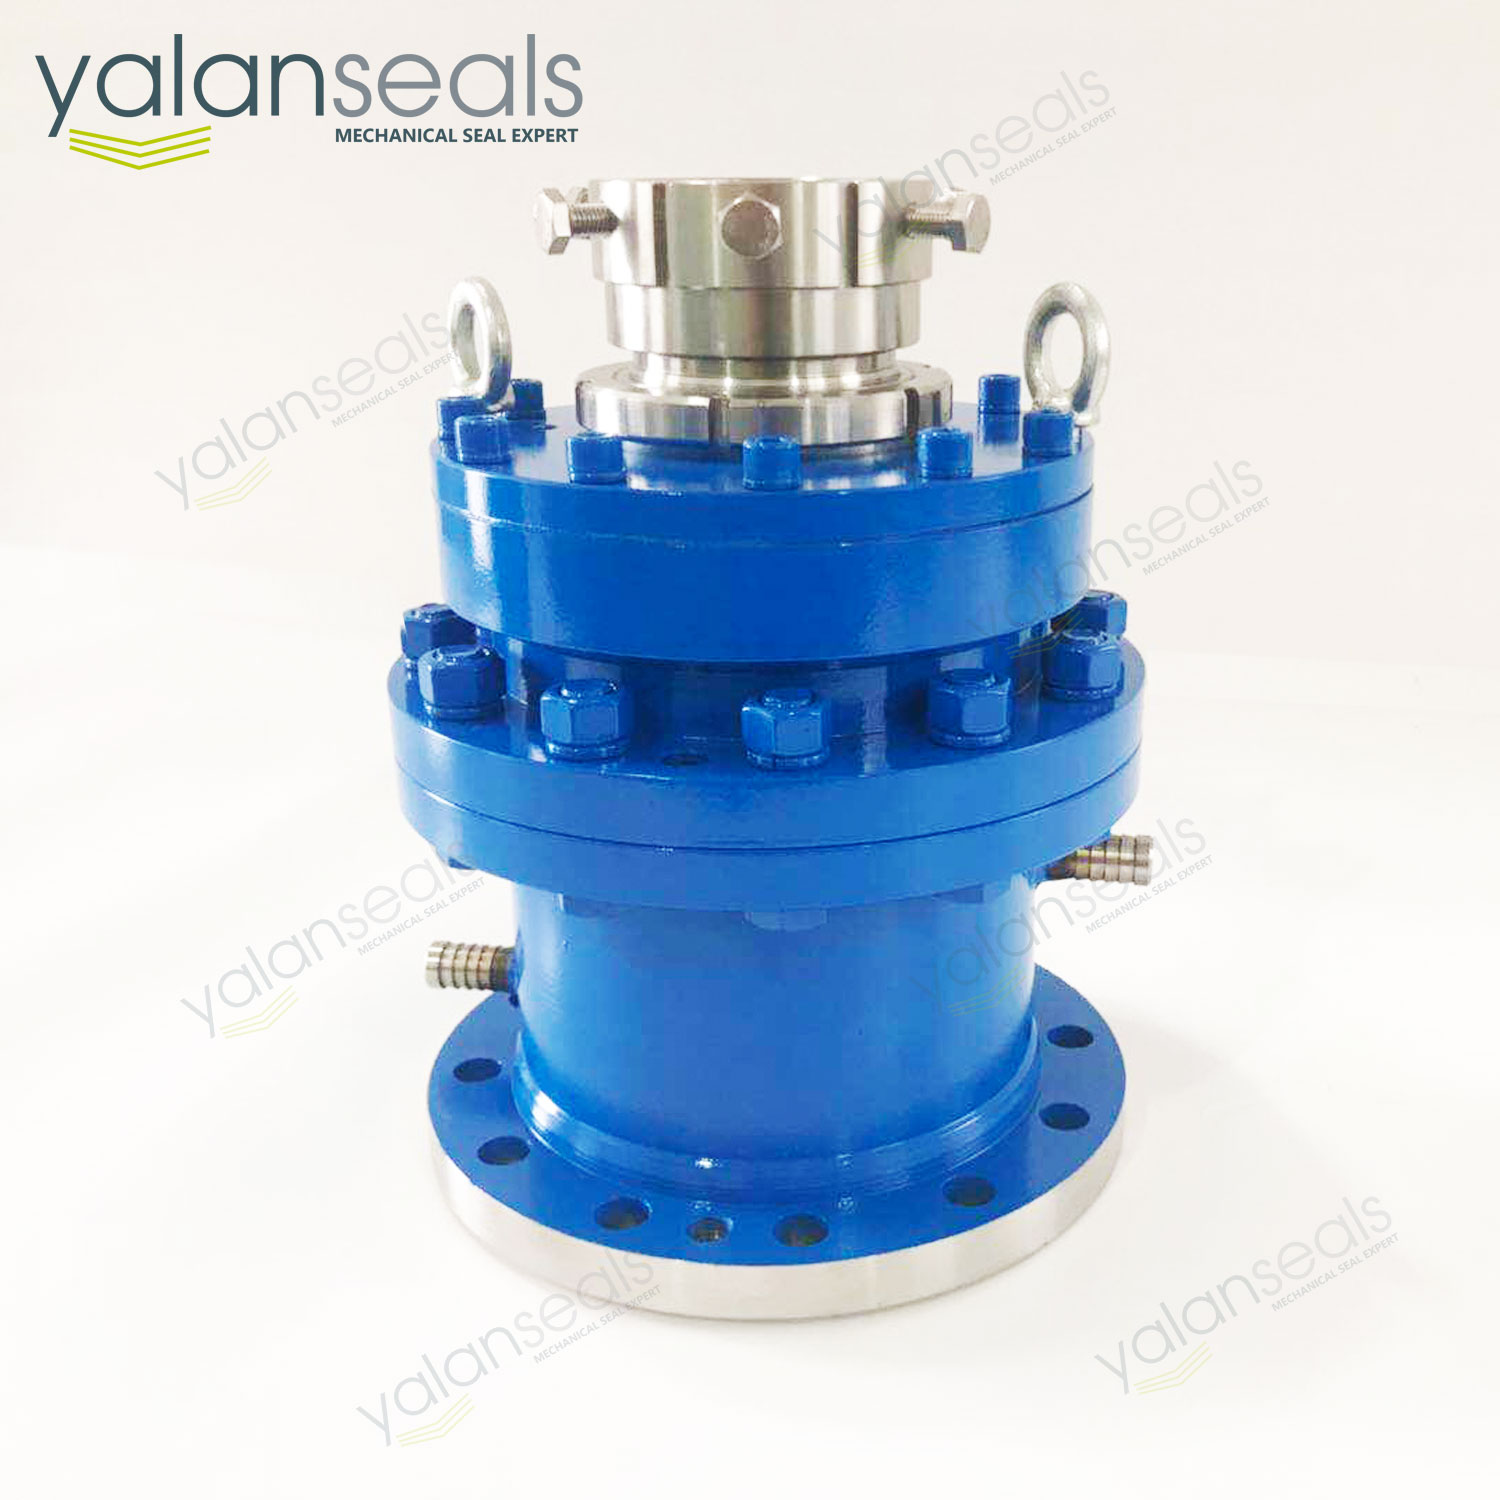 Type 207 Cartridge Mechanical Seal for Mixers